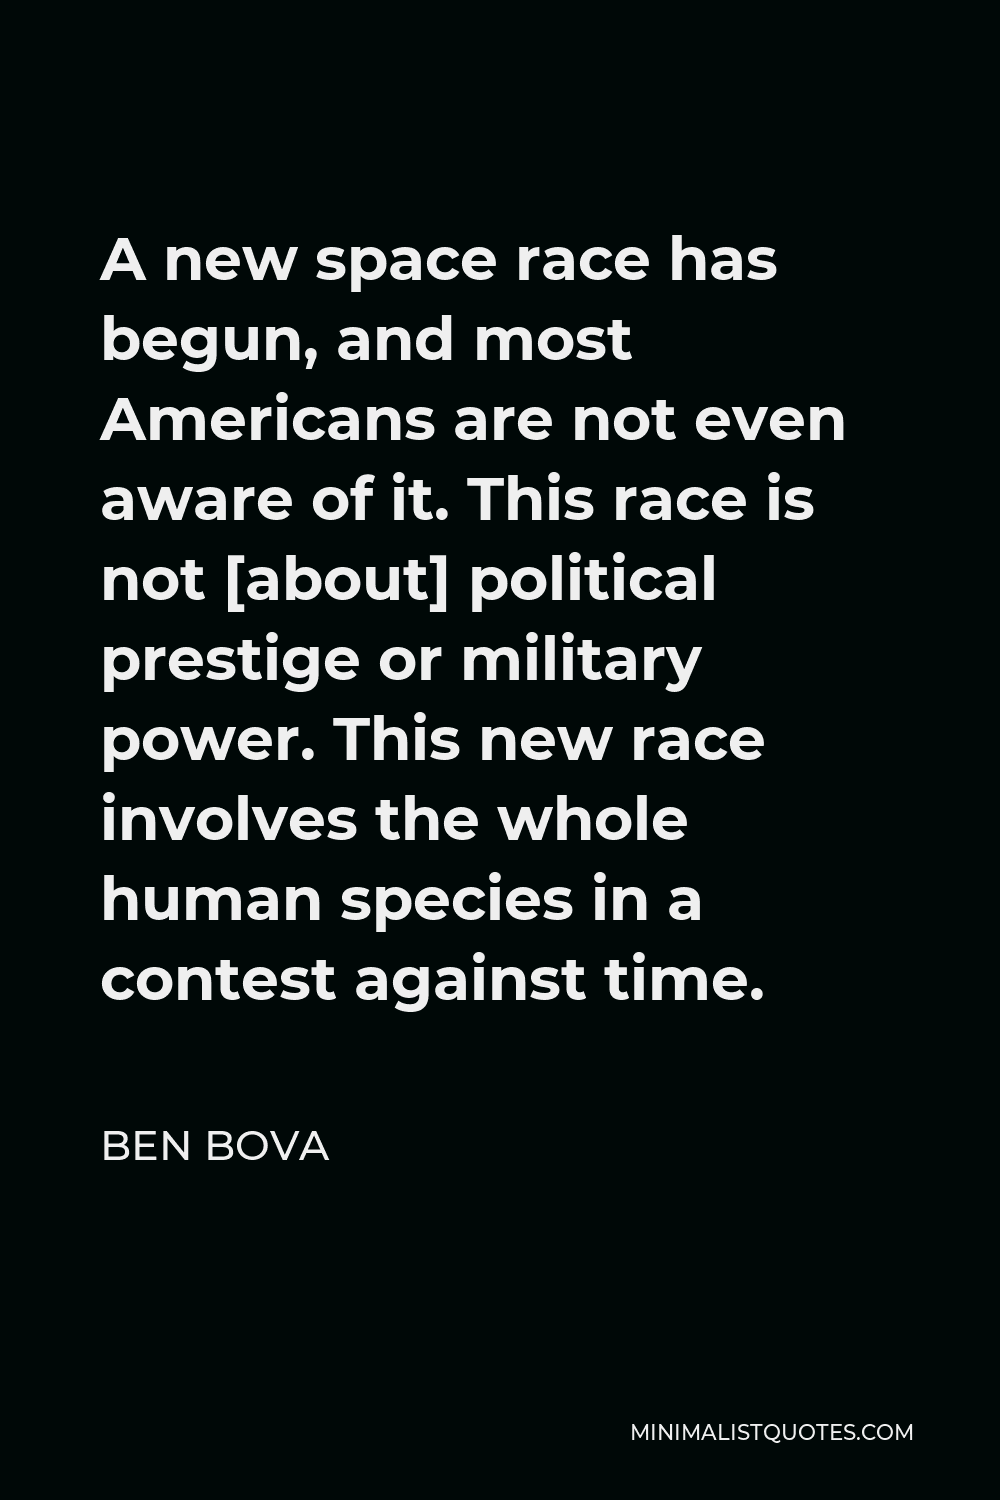 Ben Bova Quote - A new space race has begun, and most Americans are not even aware of it. This race is not [about] political prestige or military power. This new race involves the whole human species in a contest against time.